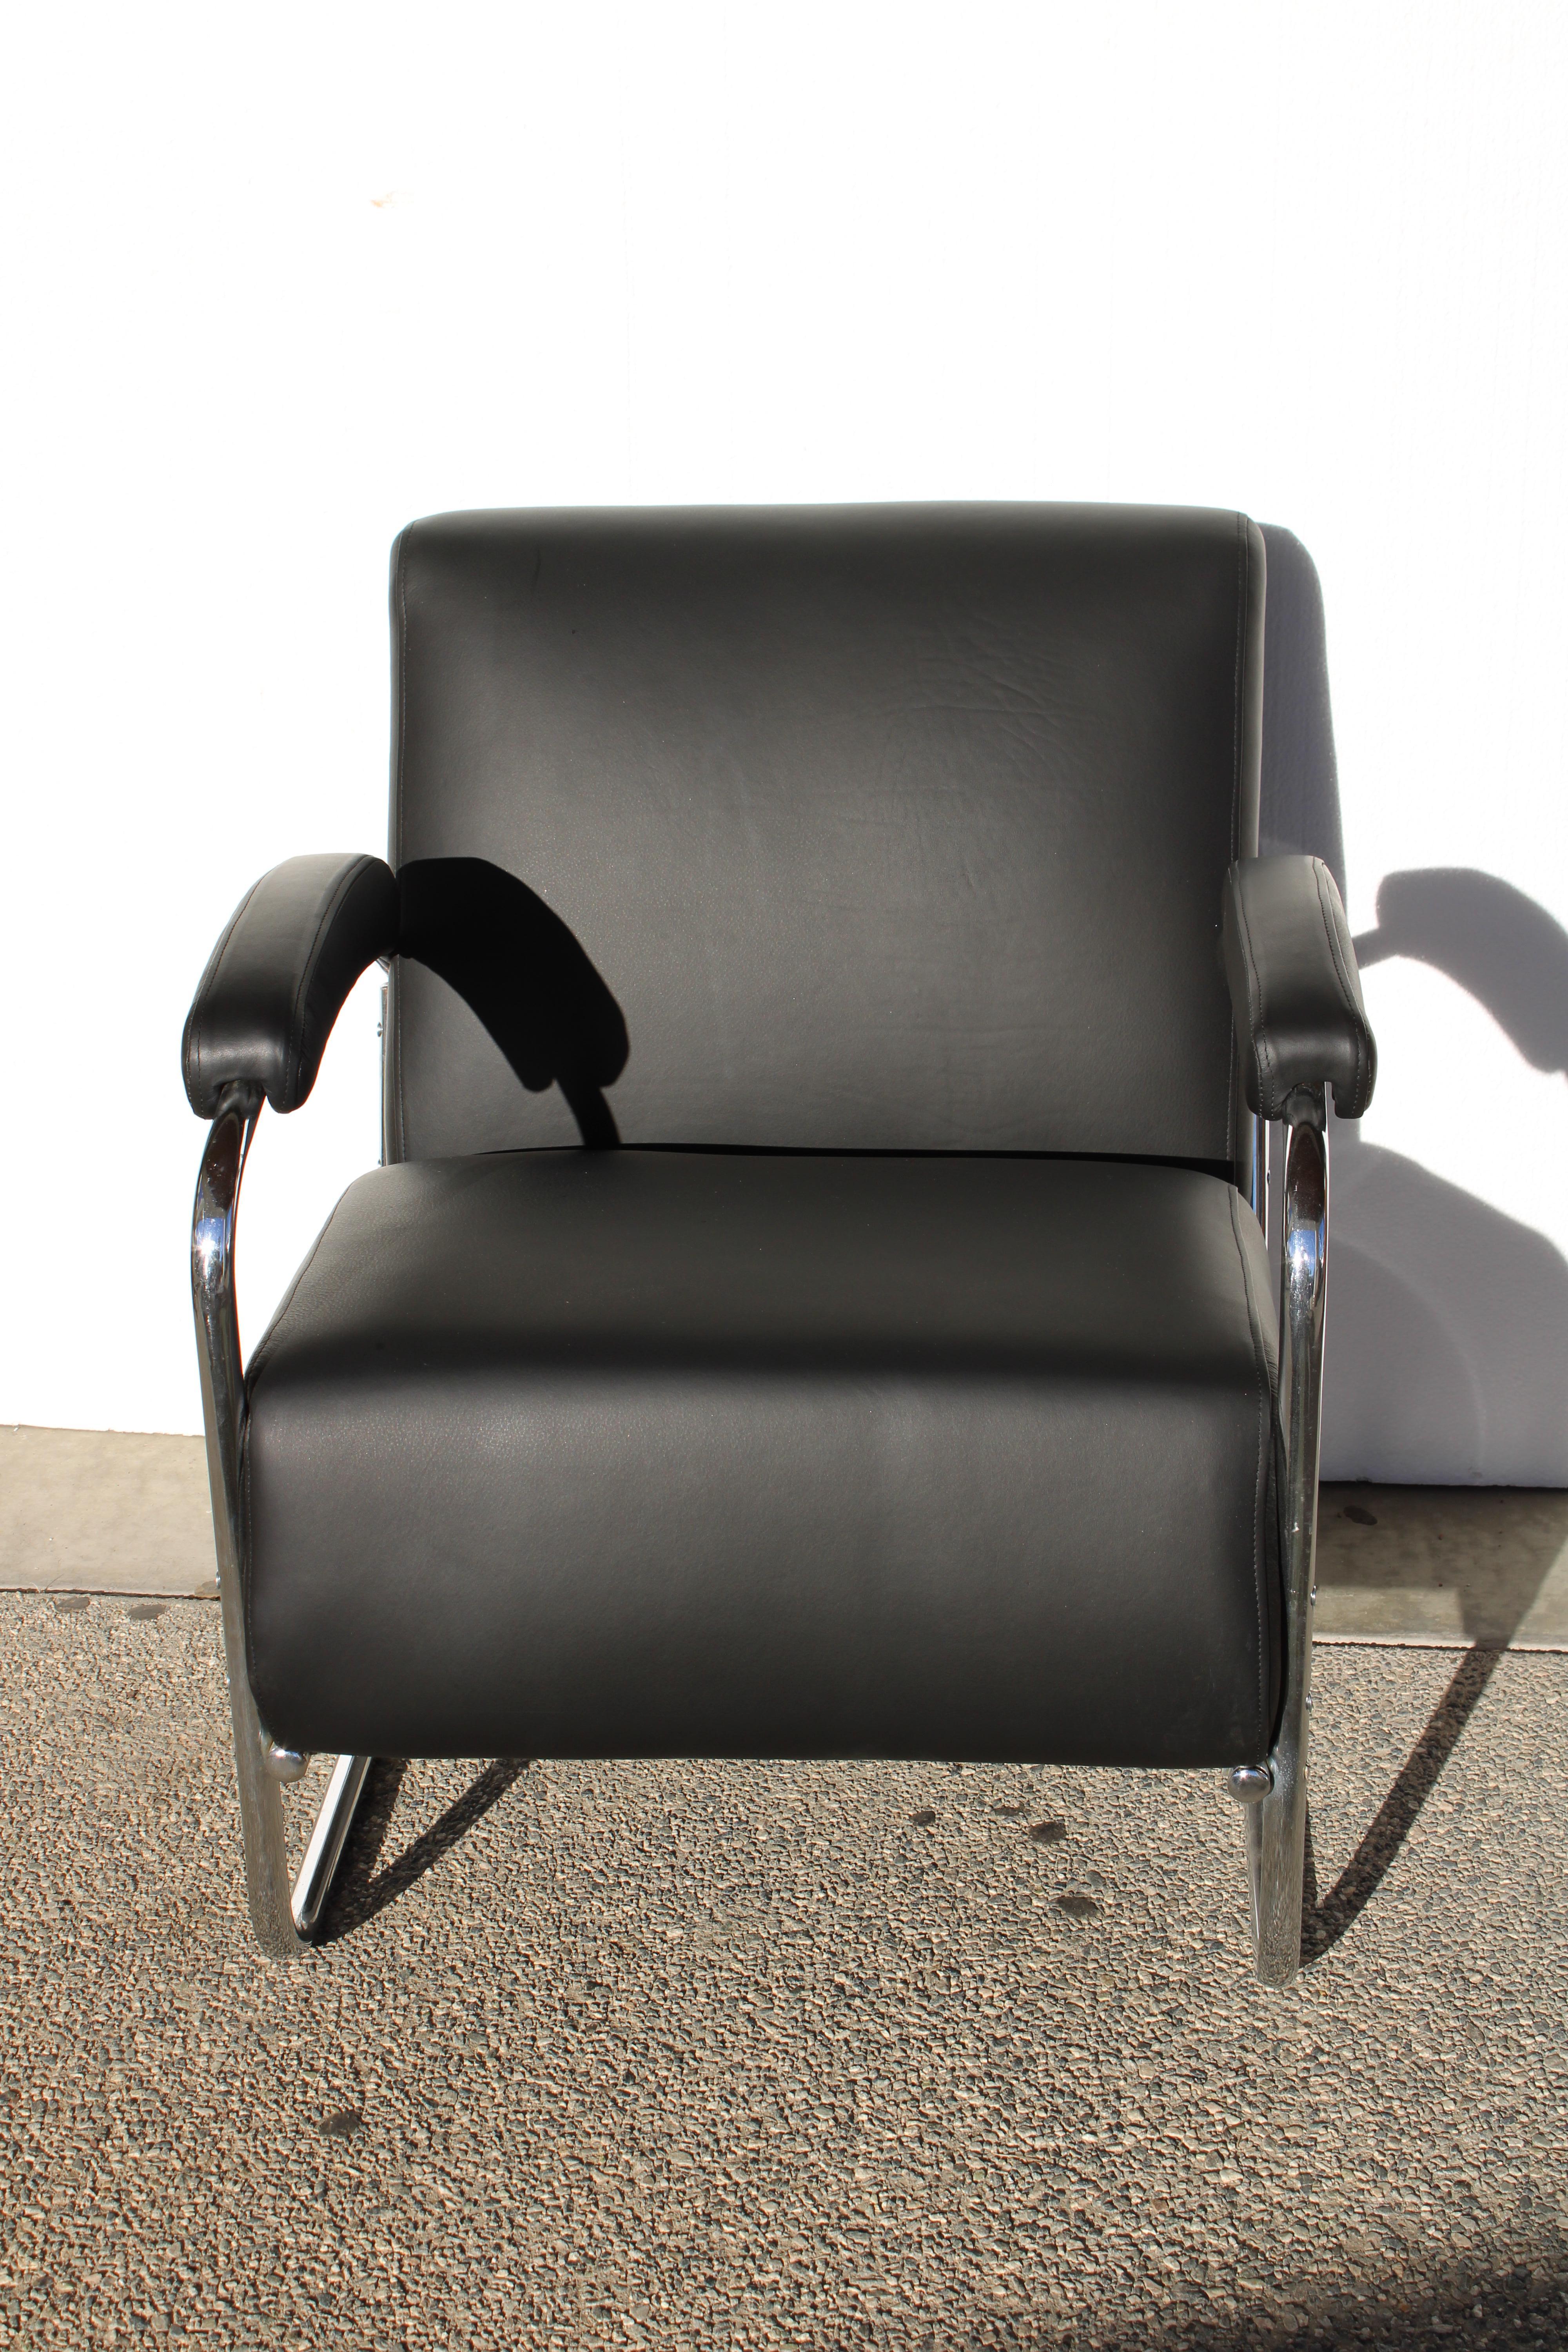 This lounge chair was originally a sofa designed by the Lloyd Manufactureing Company.  Due to the wear we decided to make it a comfortable lounge chair upholstered in black leather.  The steel chrome is all original.  The chair measures 27.5